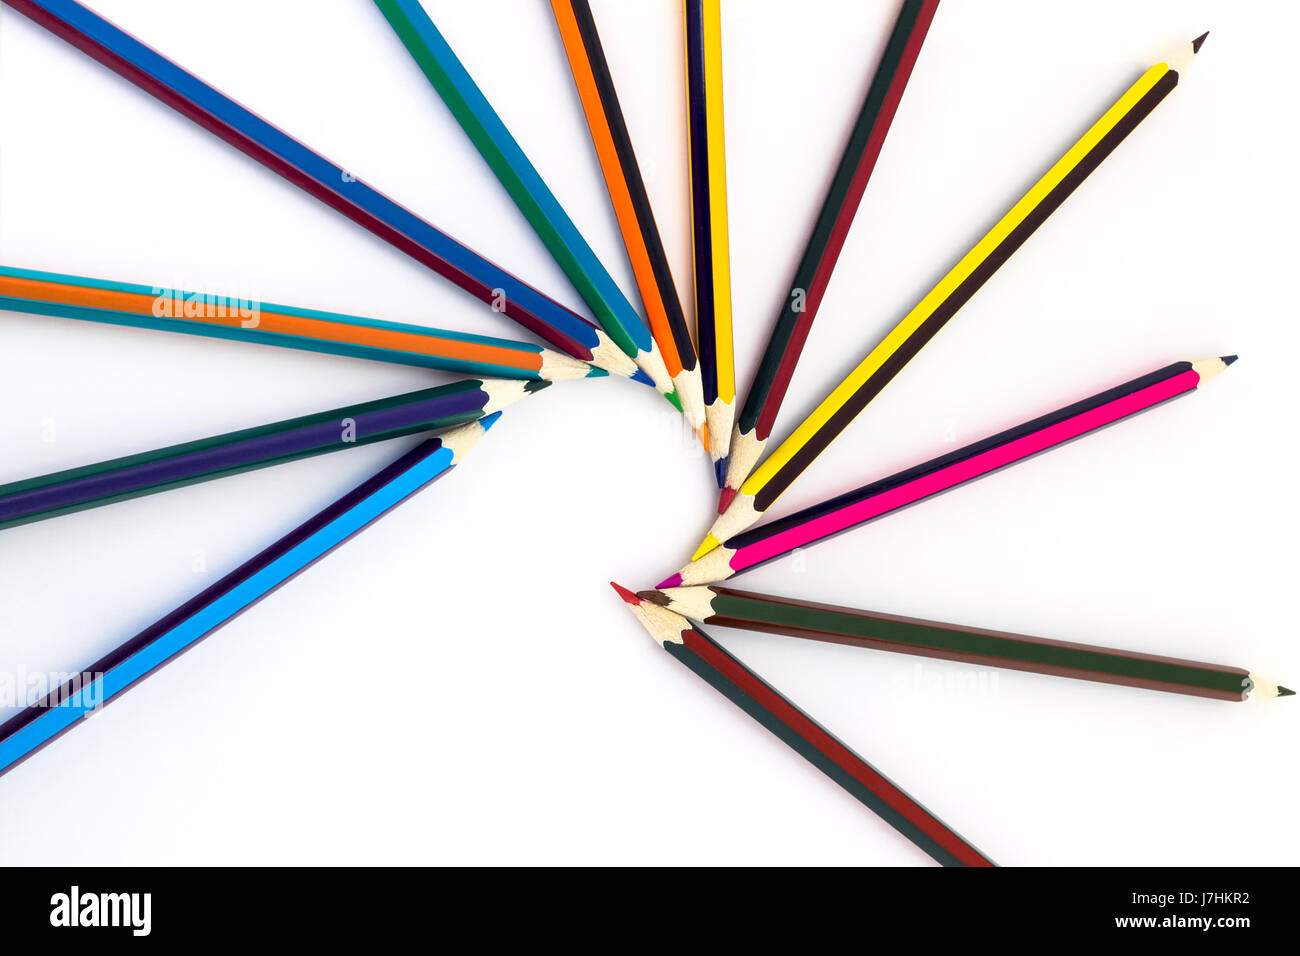 Colored pencils isolated on a white background Stock Photo